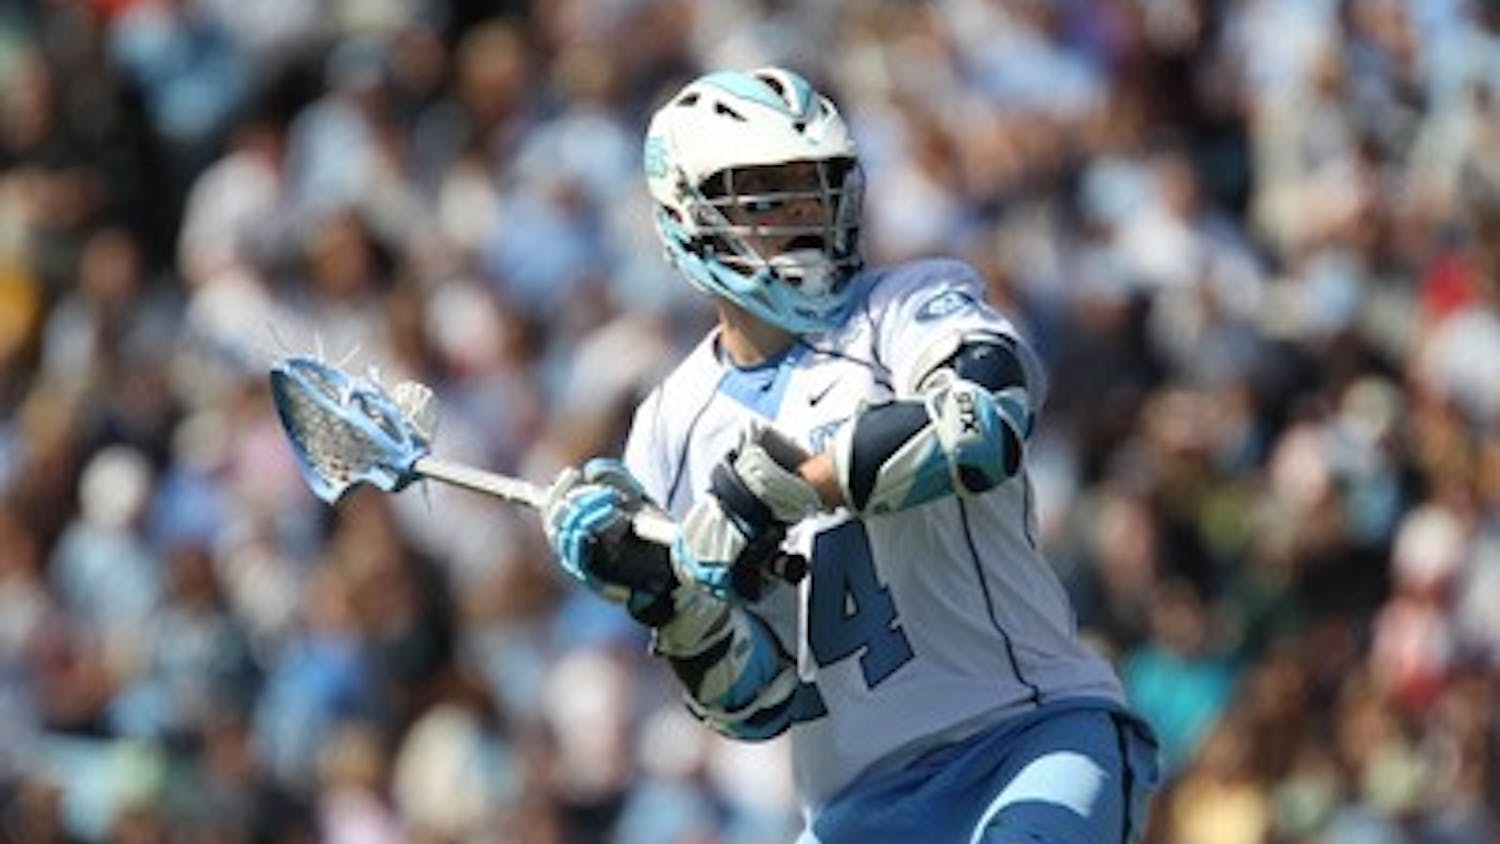 Billy Bitter said he was knocked unconscious during the Tar Heels’ 7-5 loss to Virginia. DTH/Phong Dinh